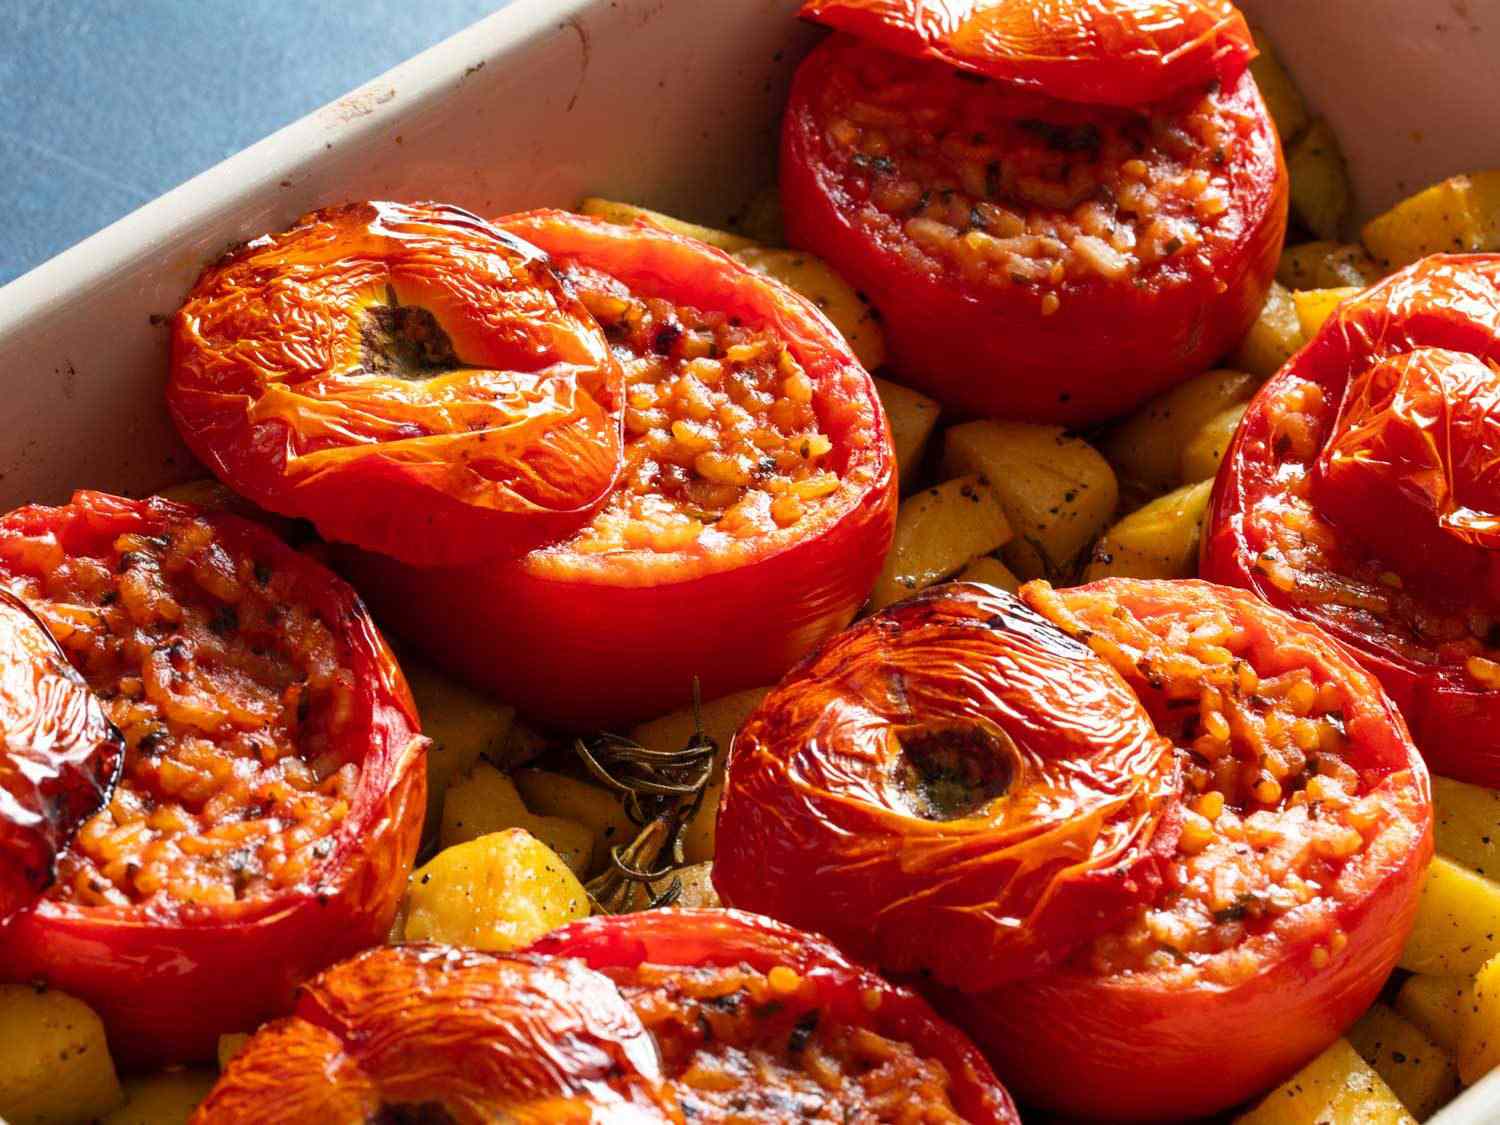 Close-up of rice-stuffed tomatoes in a baking dish with potatoes.